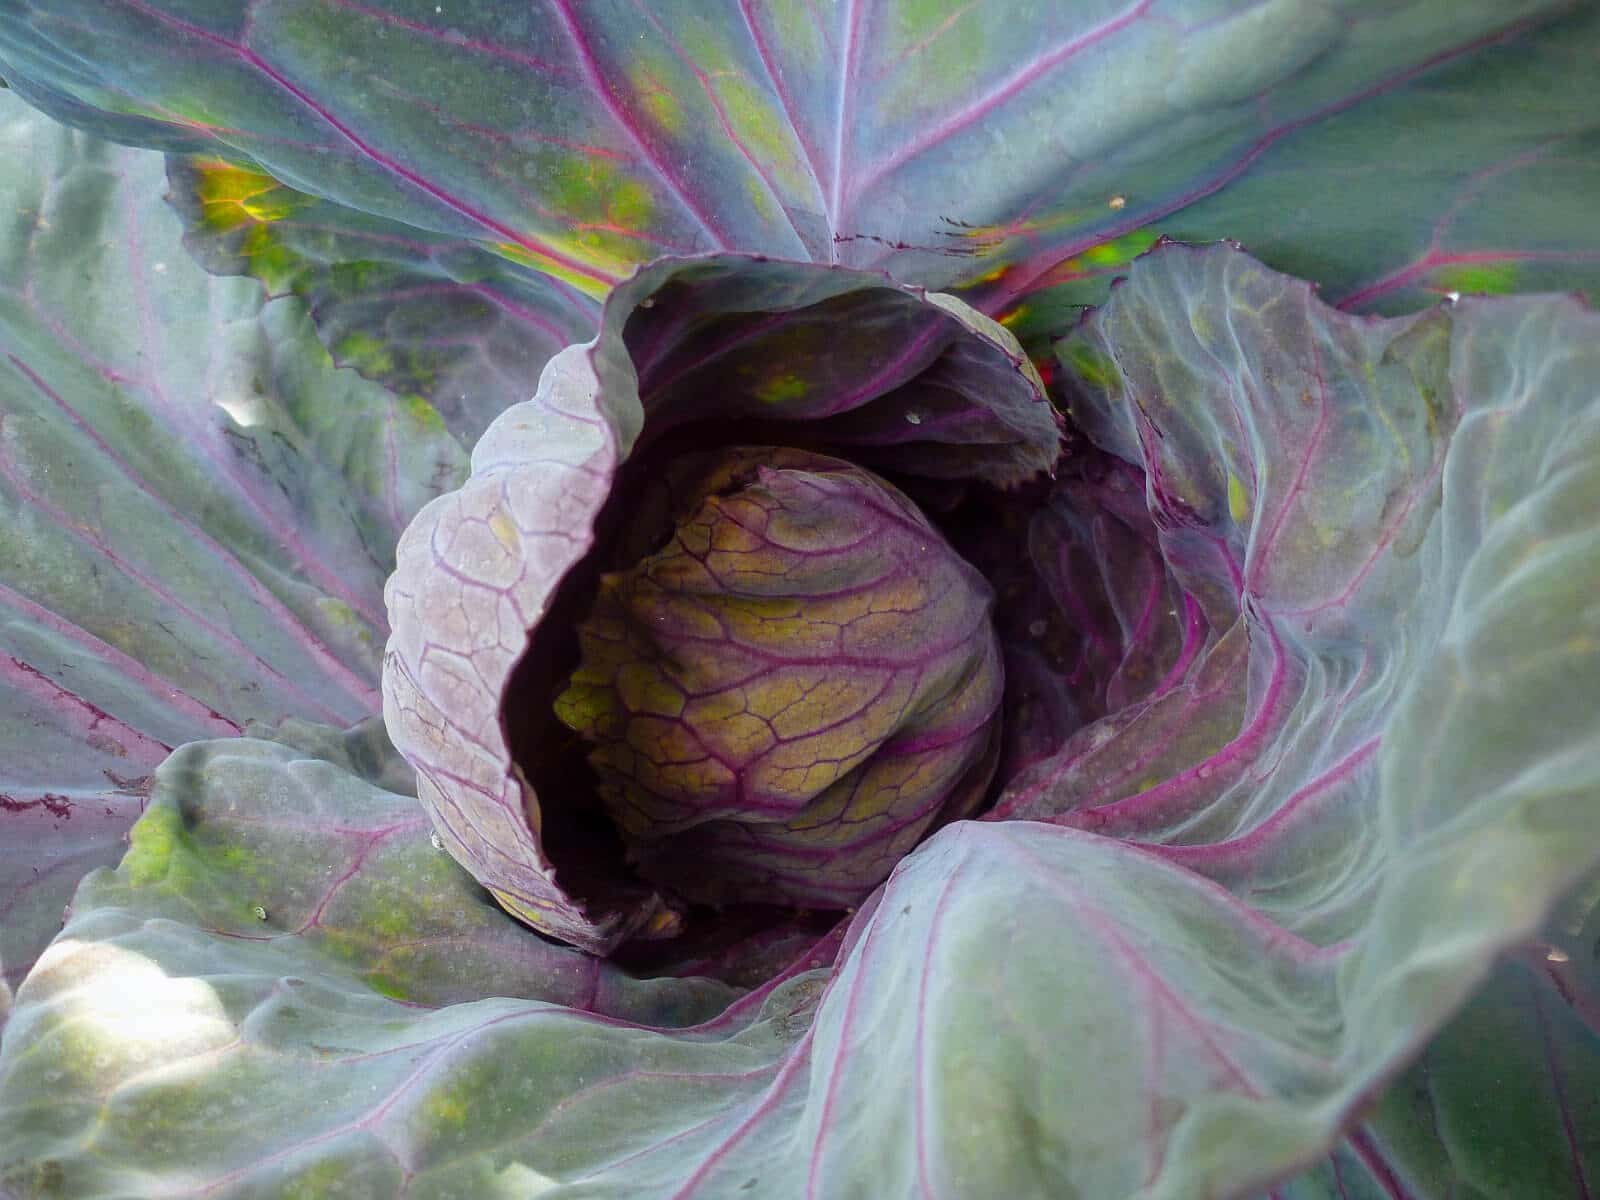 The outer leaves of cabbage are edible